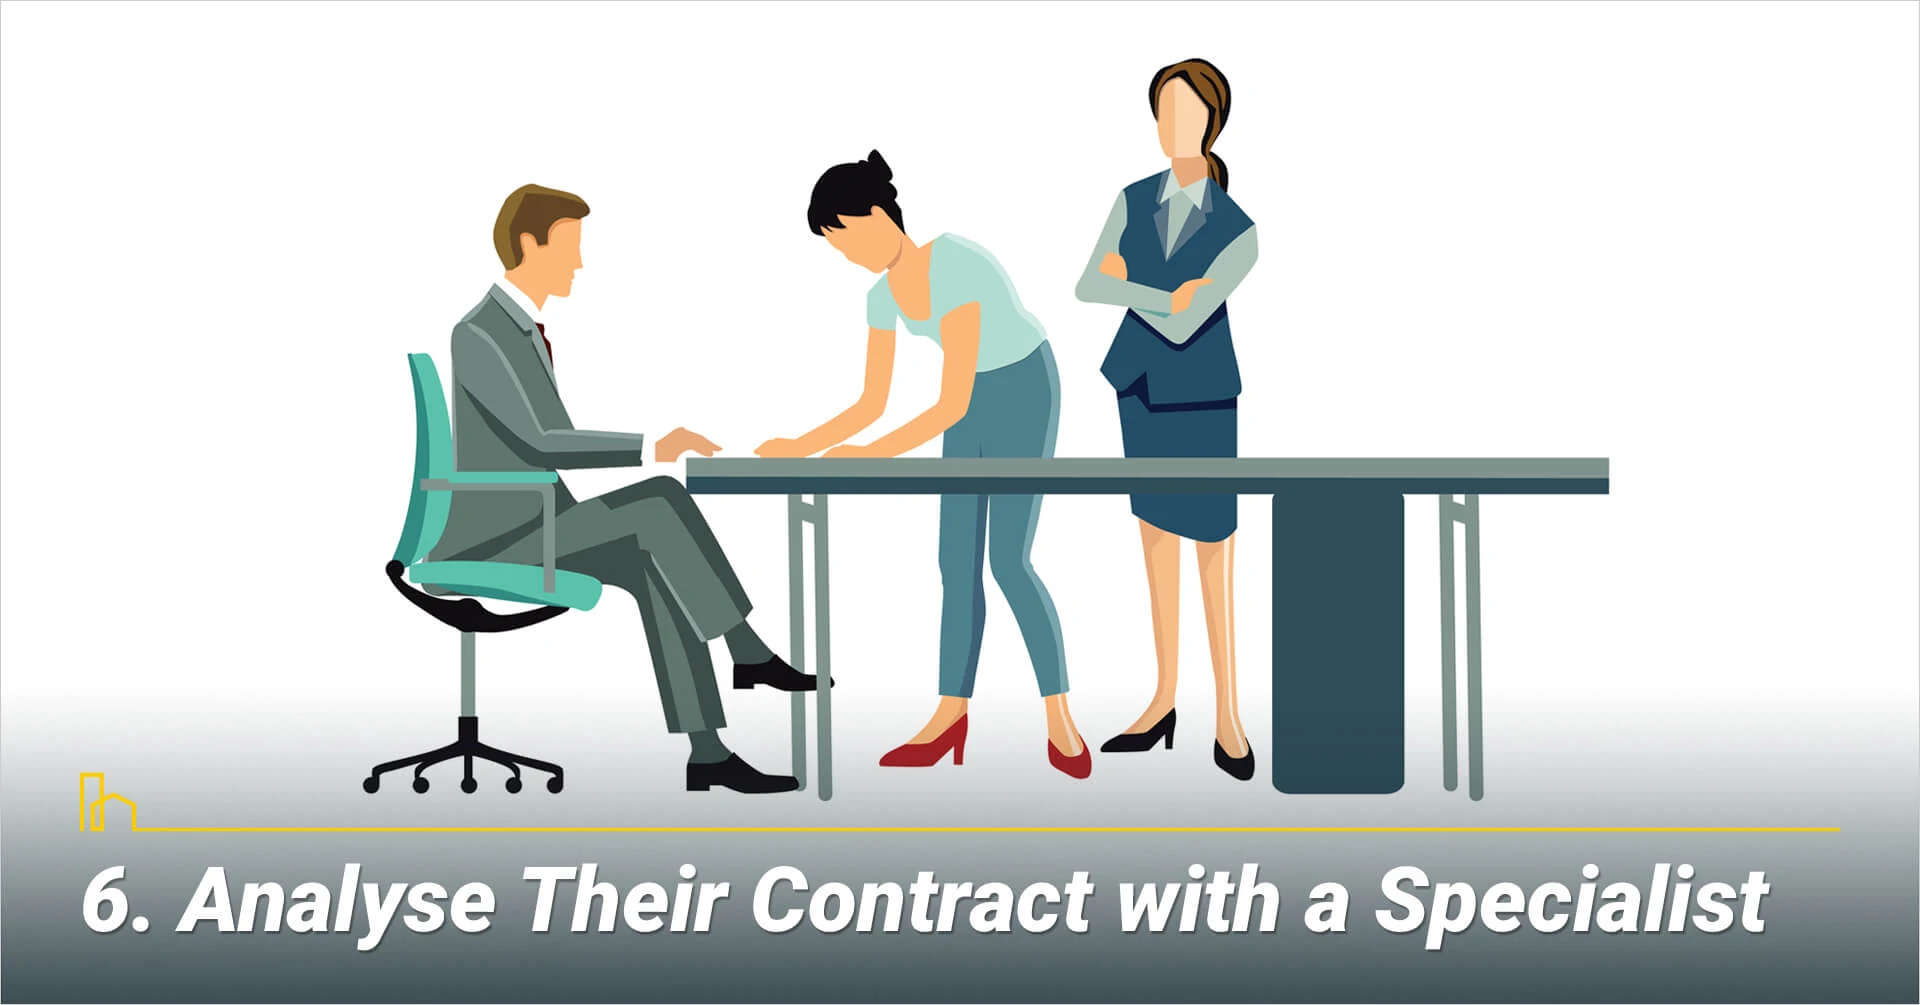 Analyse Their Contract with a Specialist, get help viewing the contract